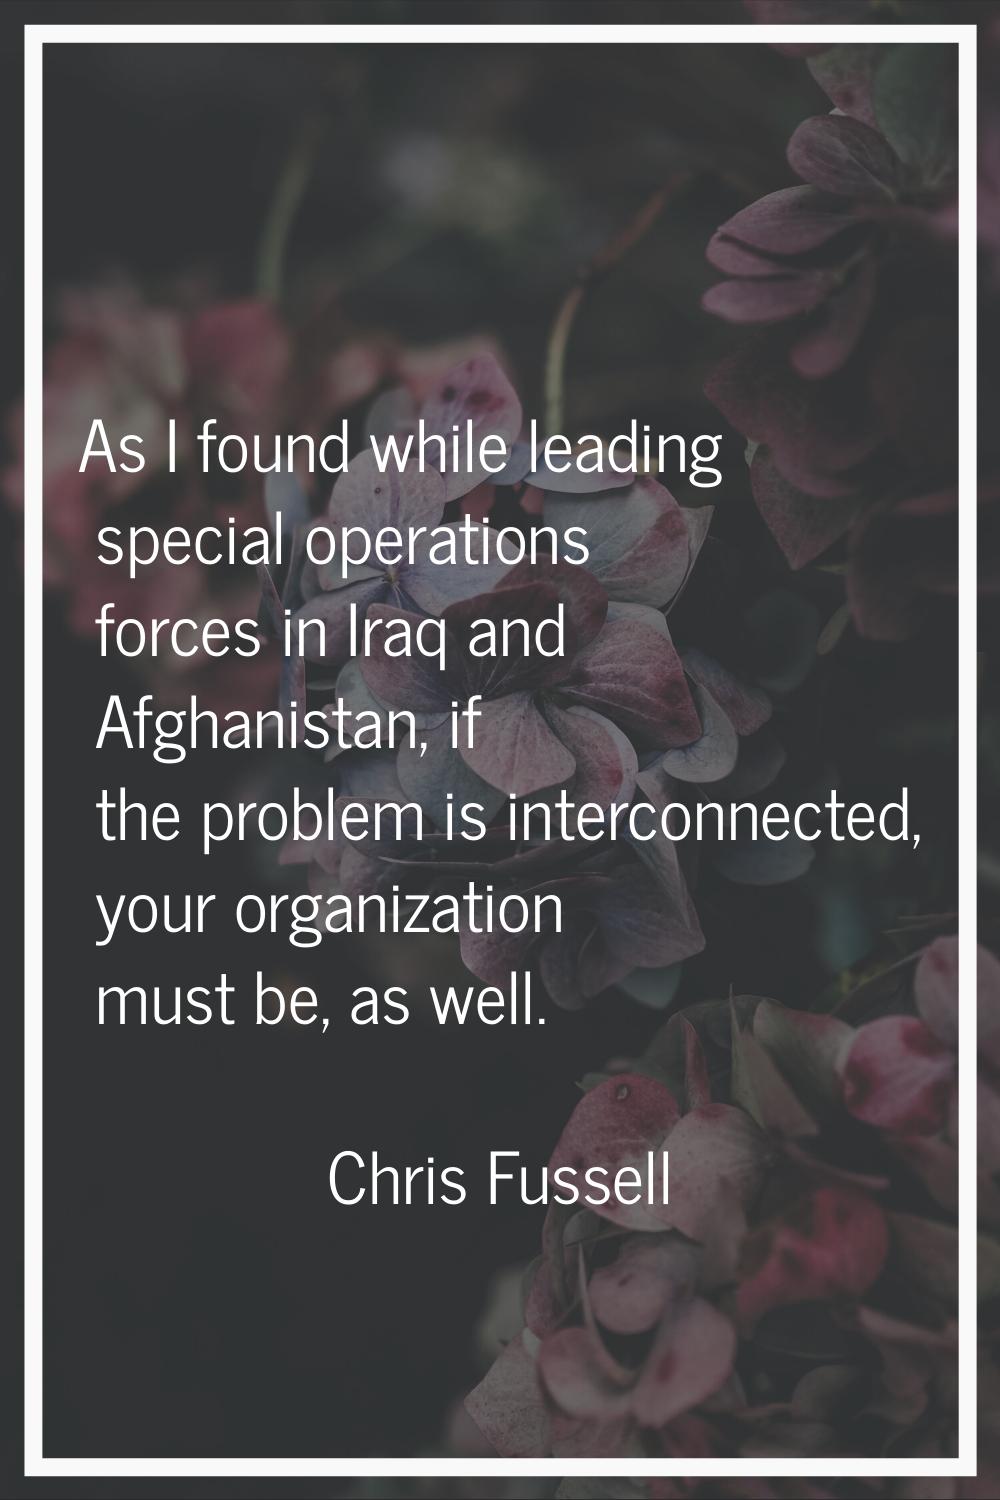 As I found while leading special operations forces in Iraq and Afghanistan, if the problem is inter